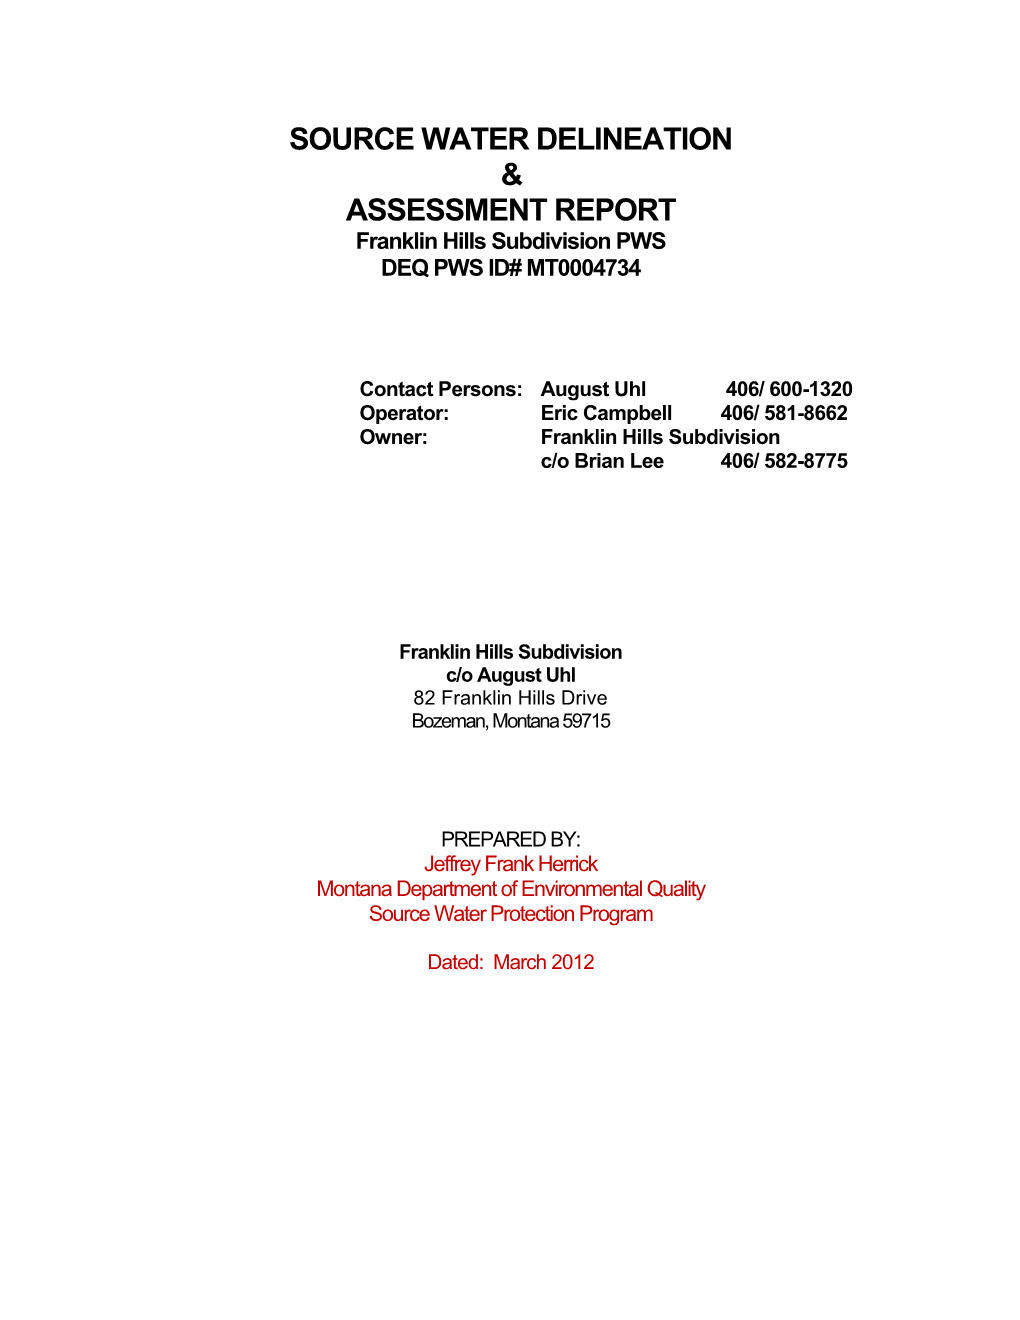 Source Water Delineation & Assessment Report